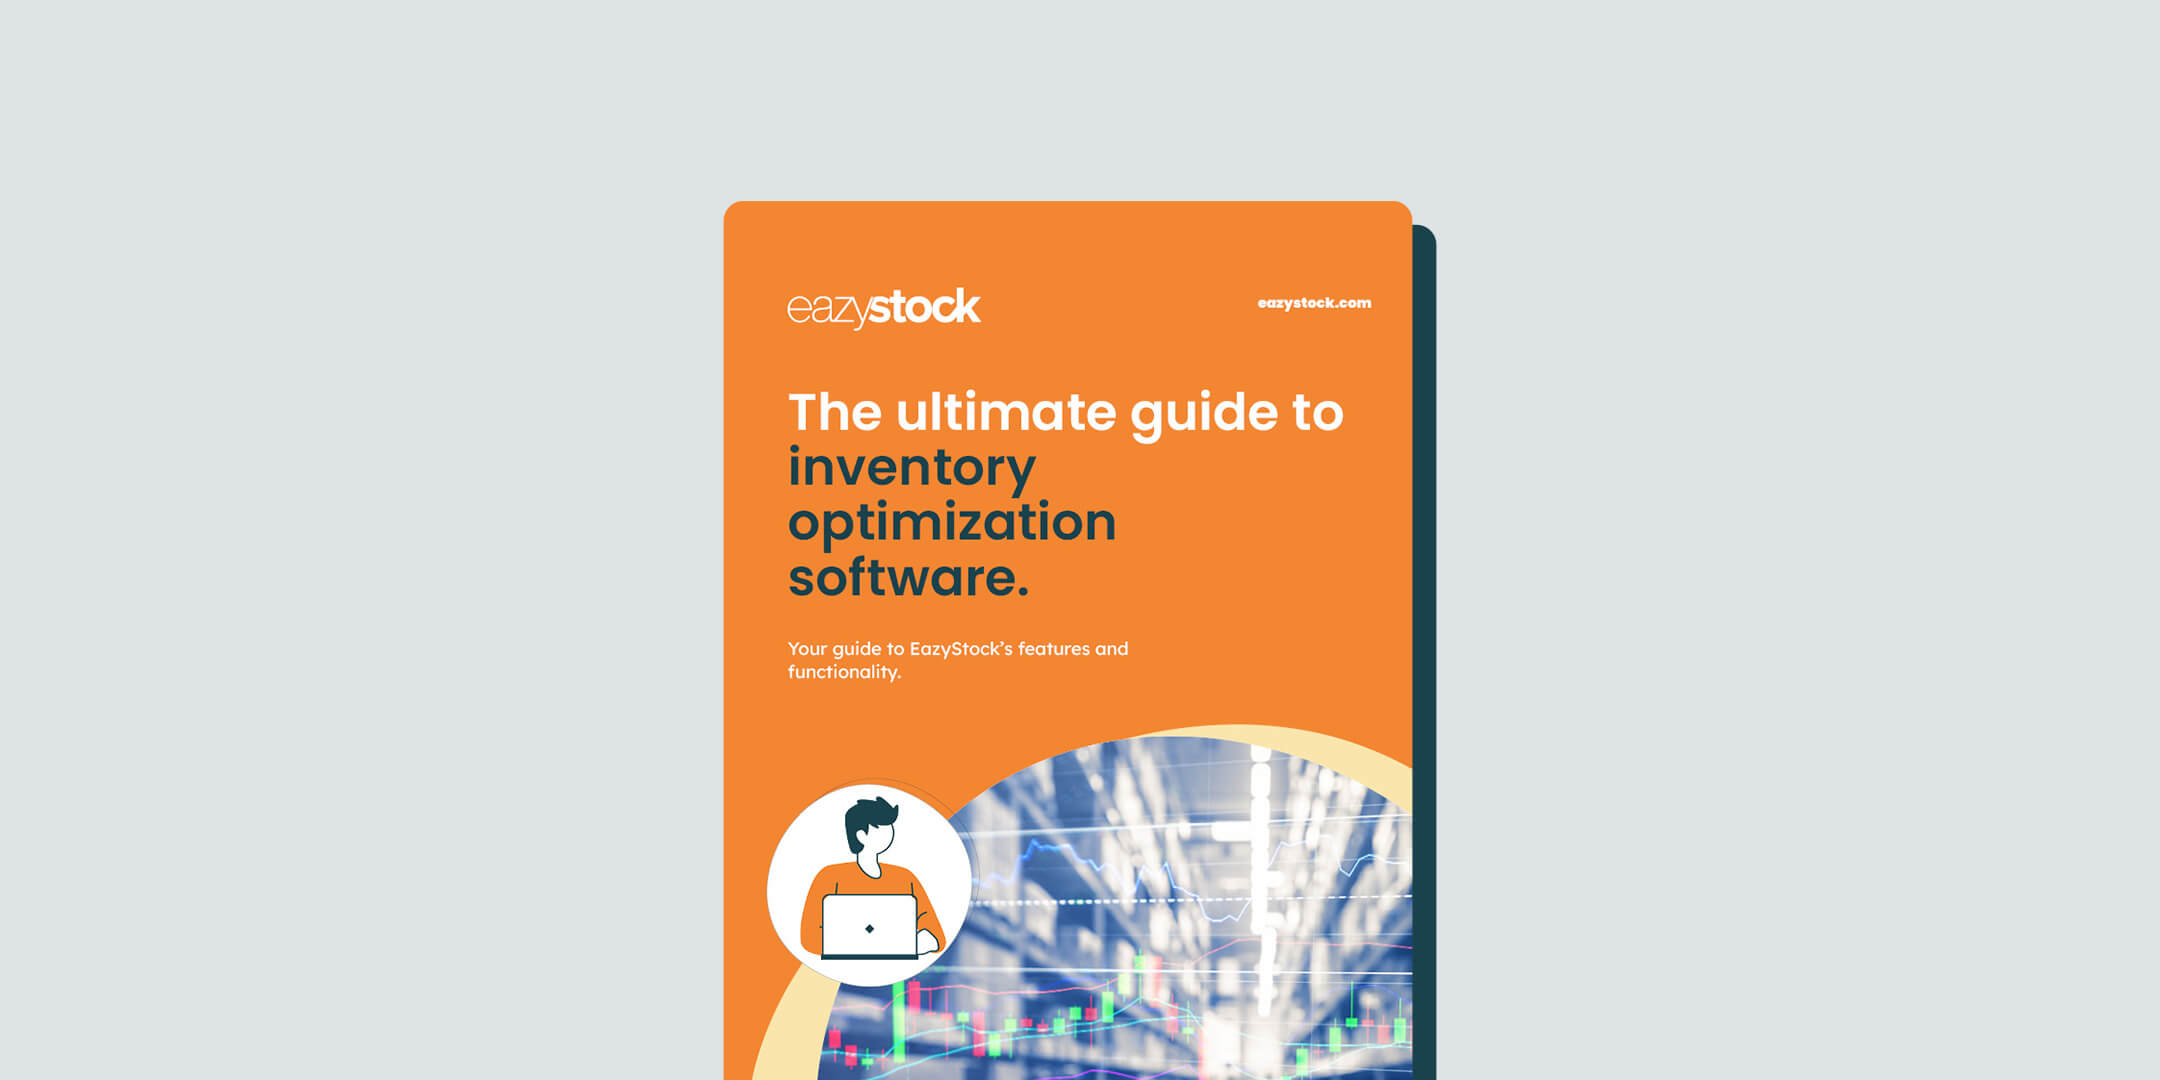 US-eGuide-The-ultimate-guide-to-inventory-optimization-software